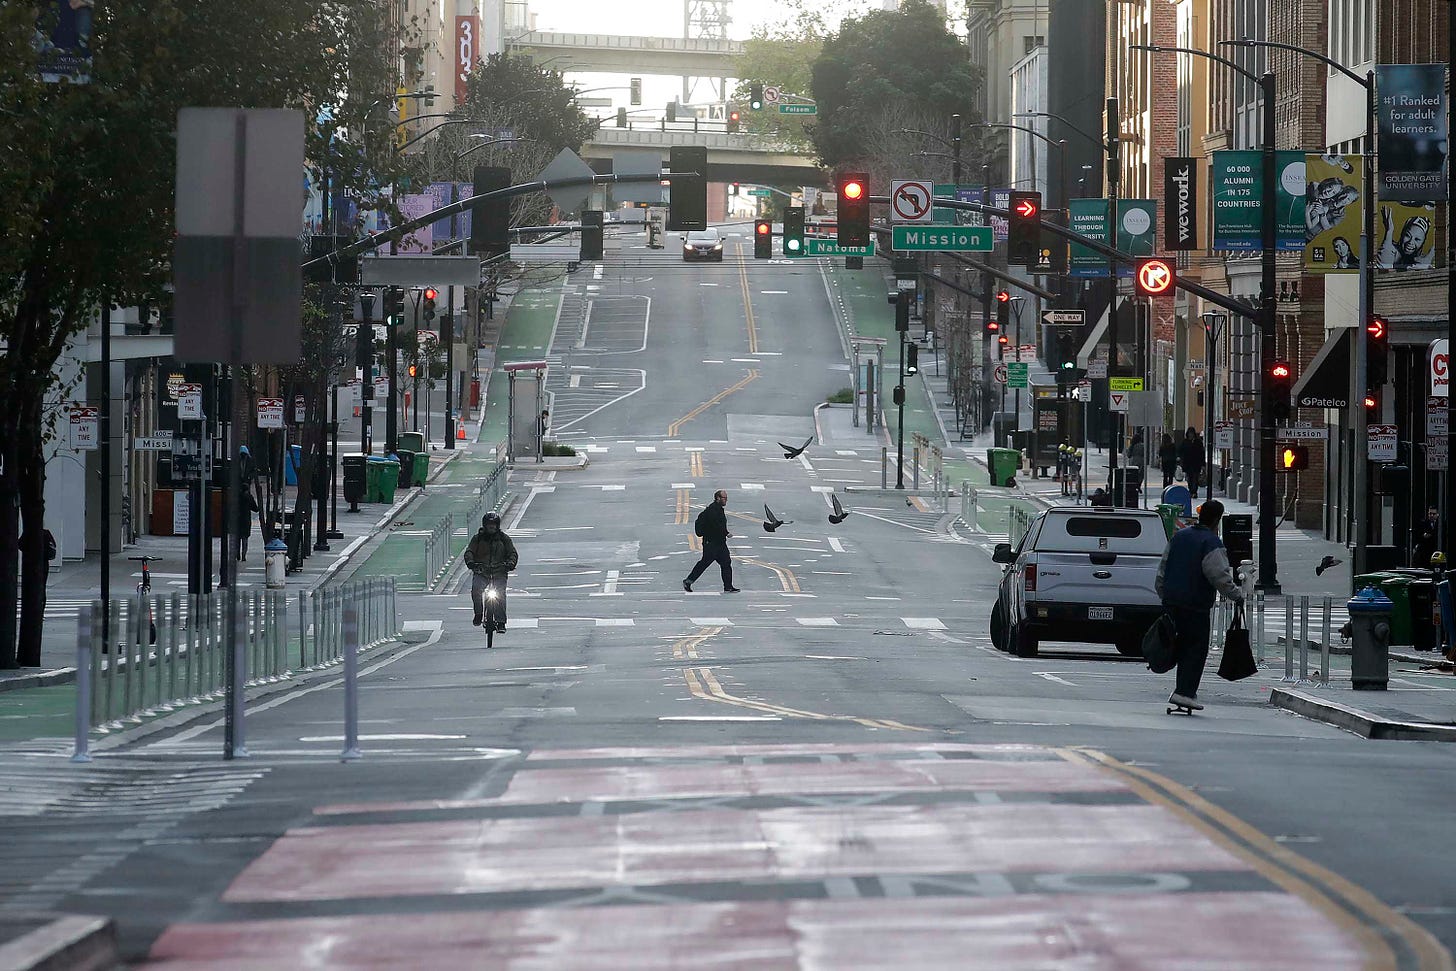 Streets empty as San Franciso ordered to shelter in place - CNN Video